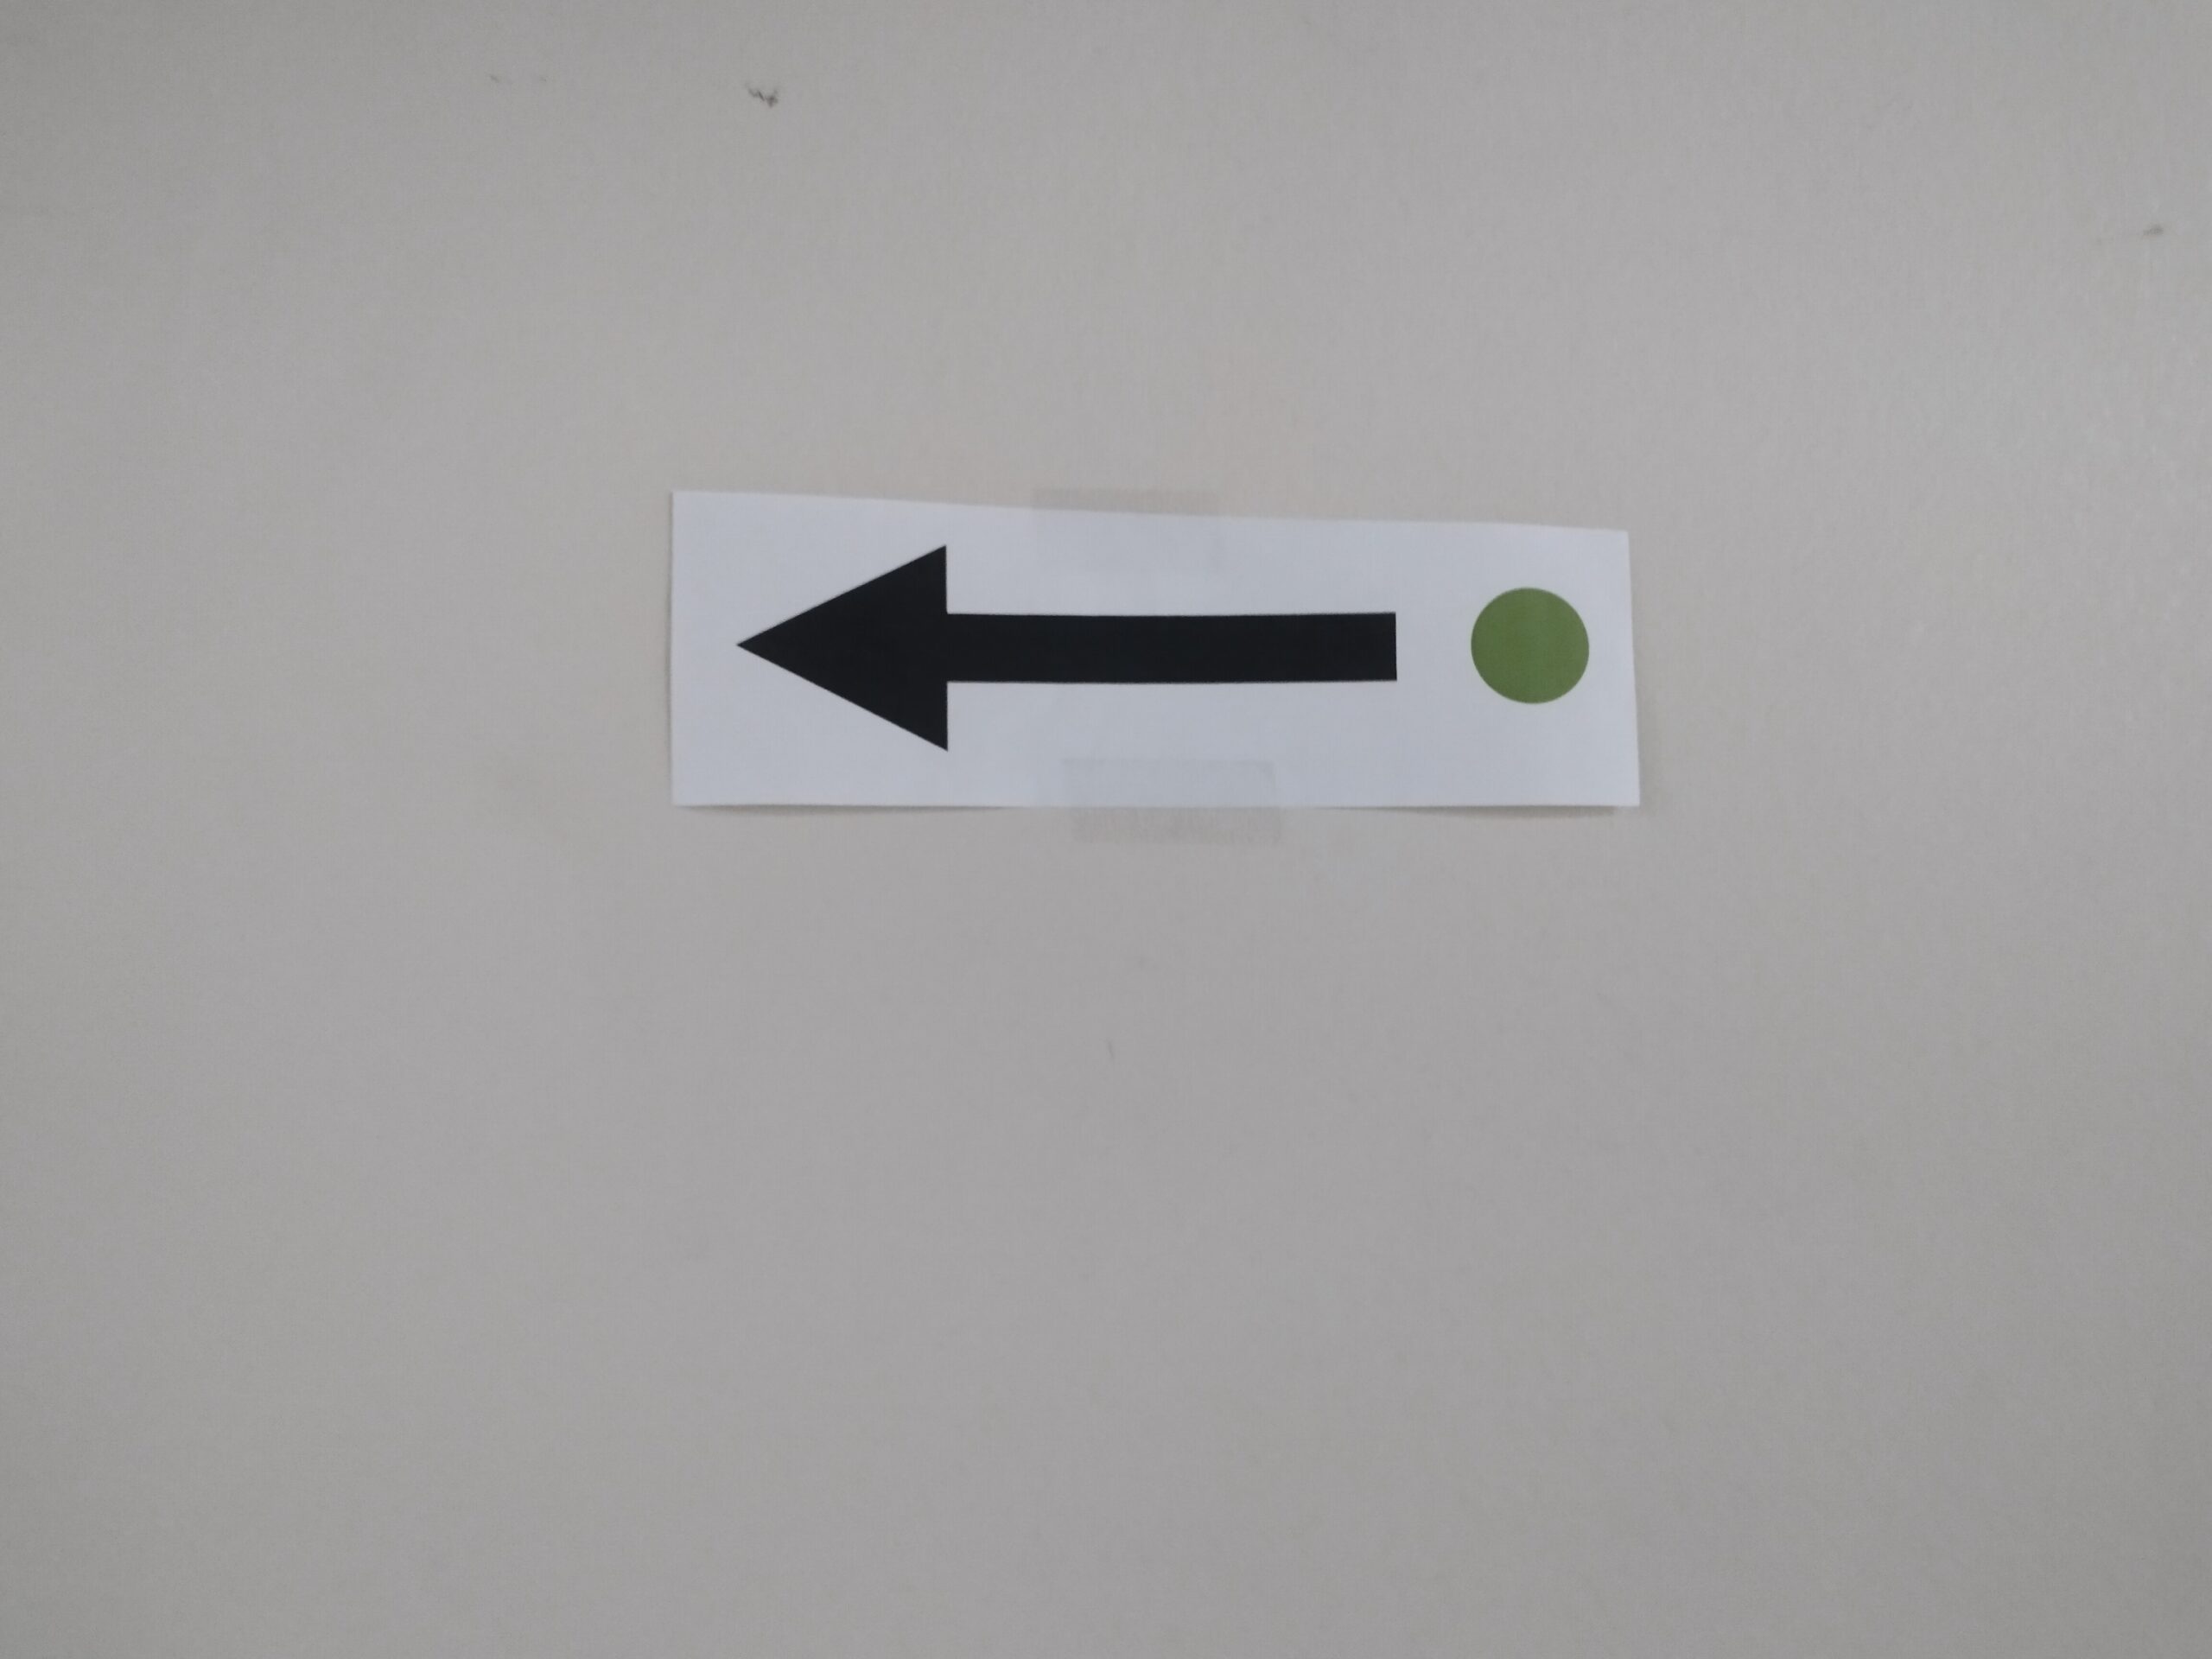 an arrow with a green circle taped to a wall